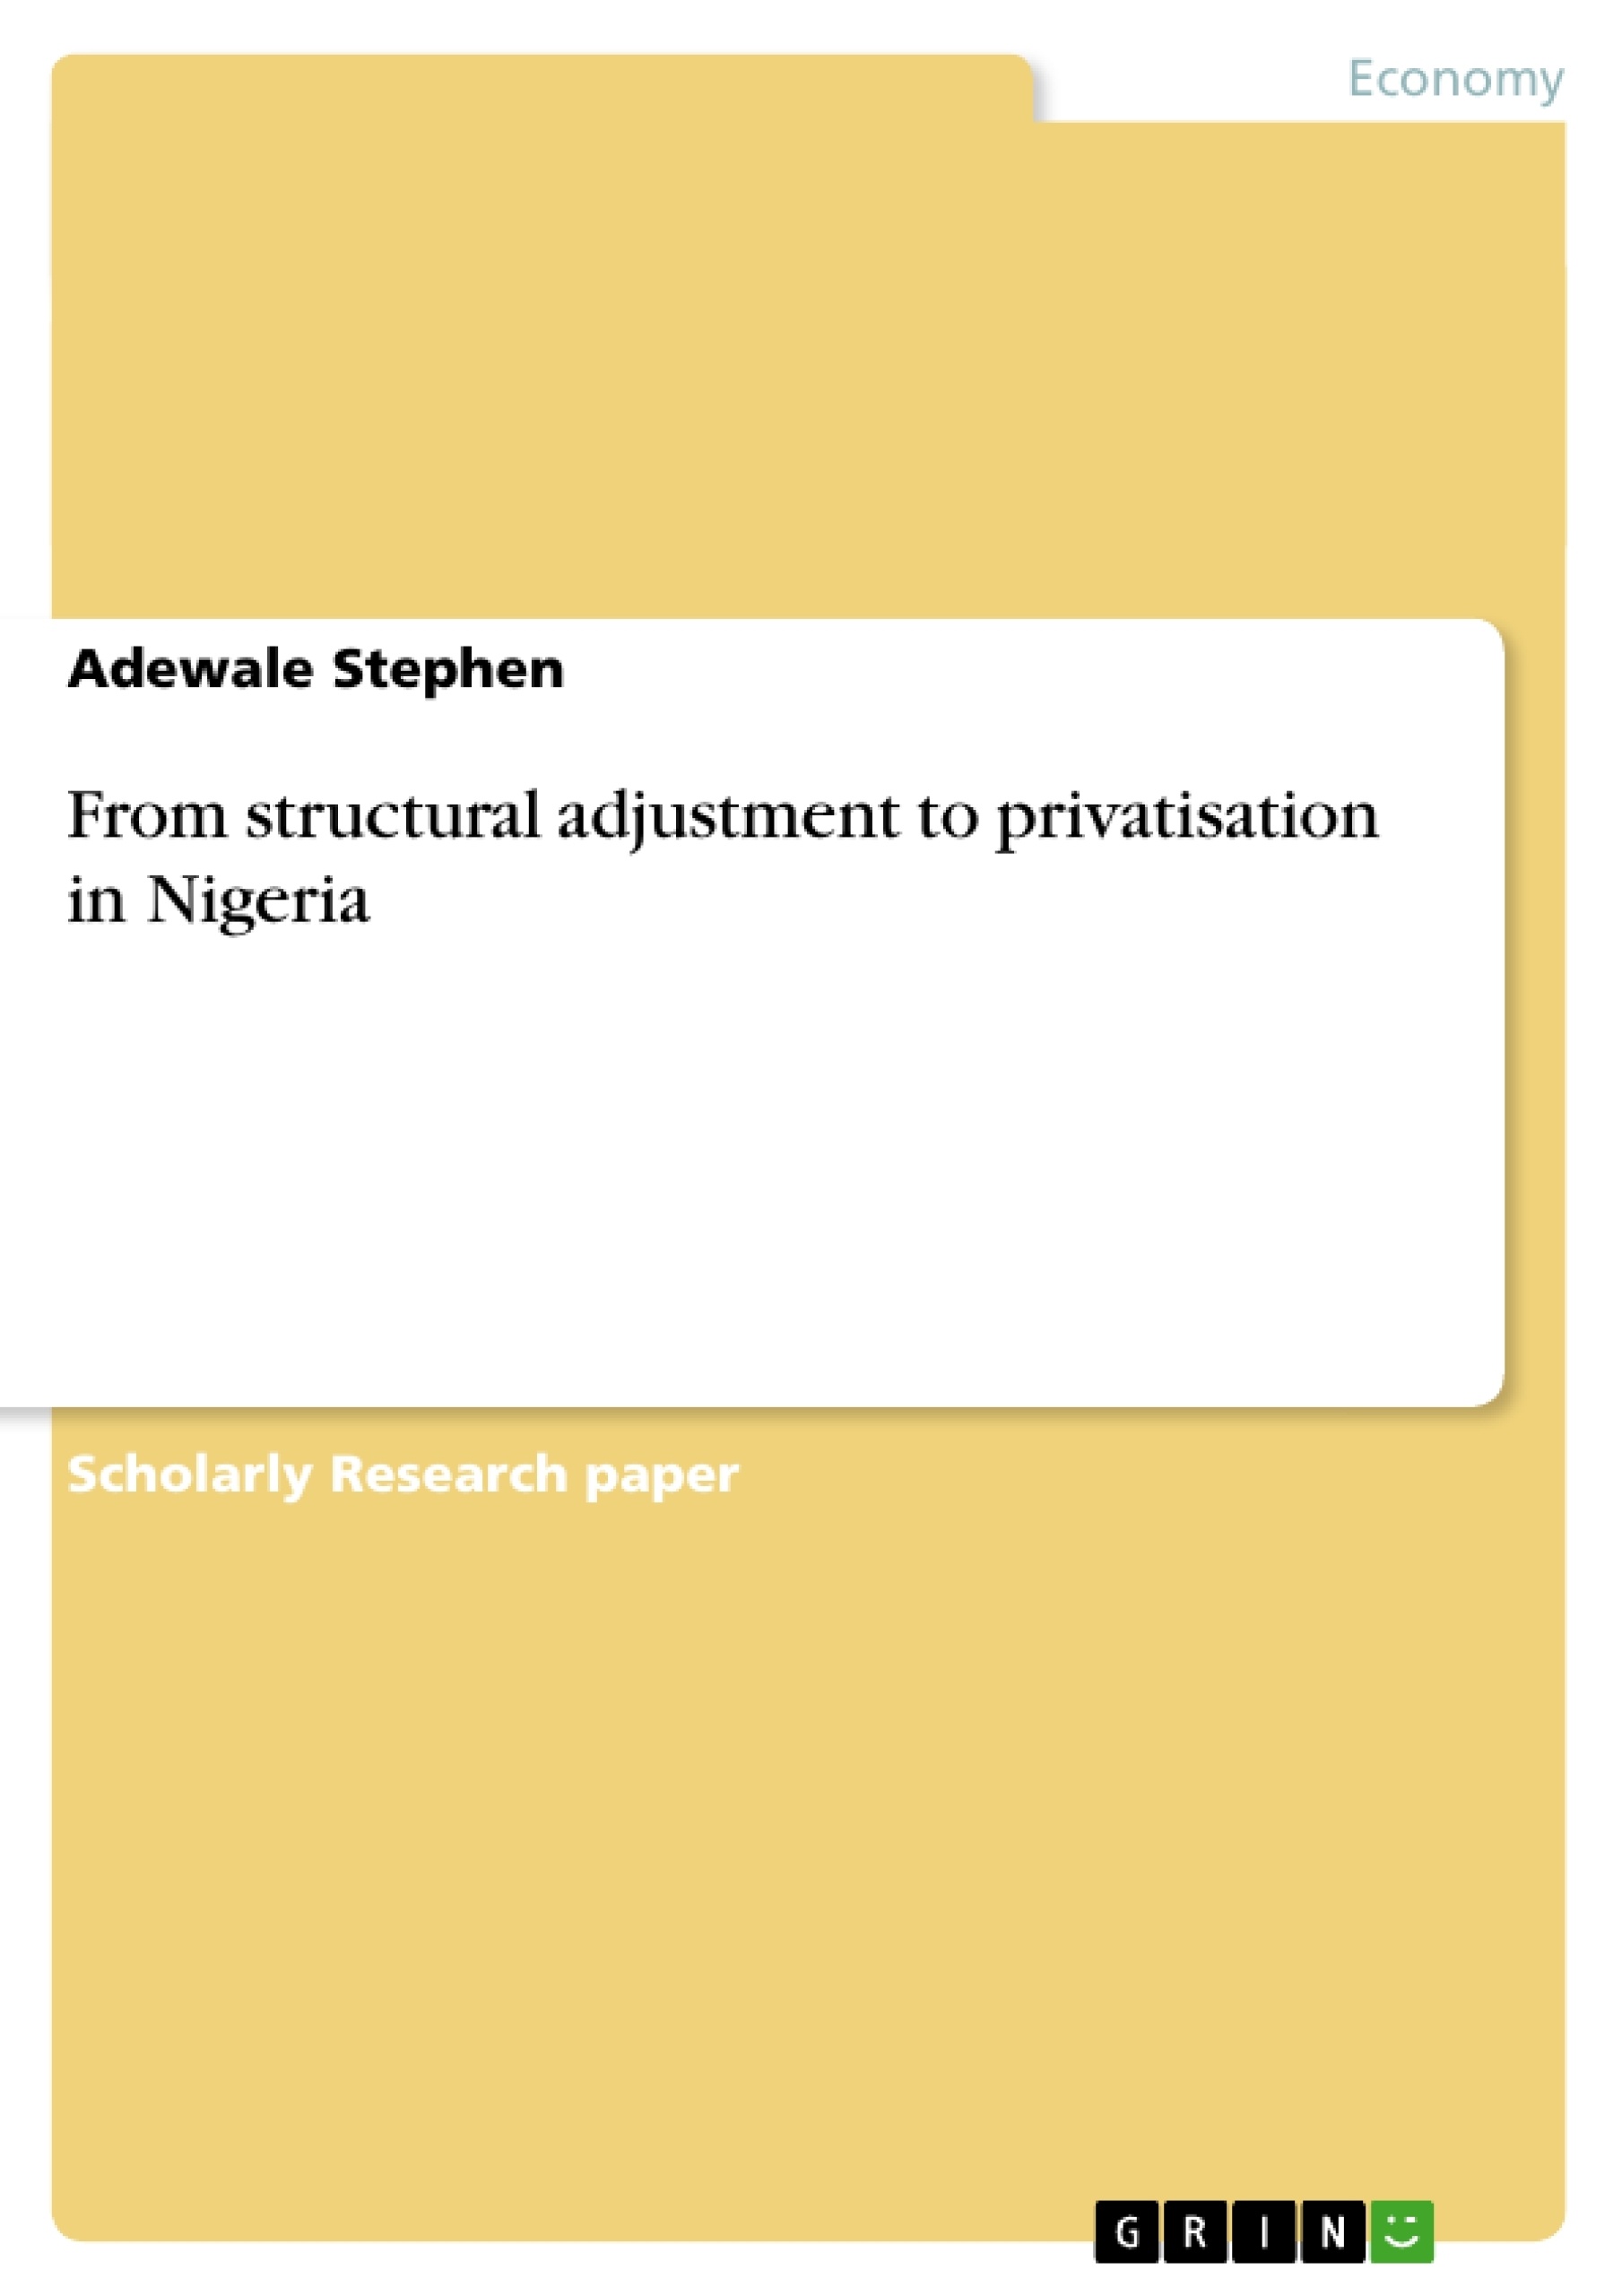 Title: From structural adjustment to privatisation in Nigeria